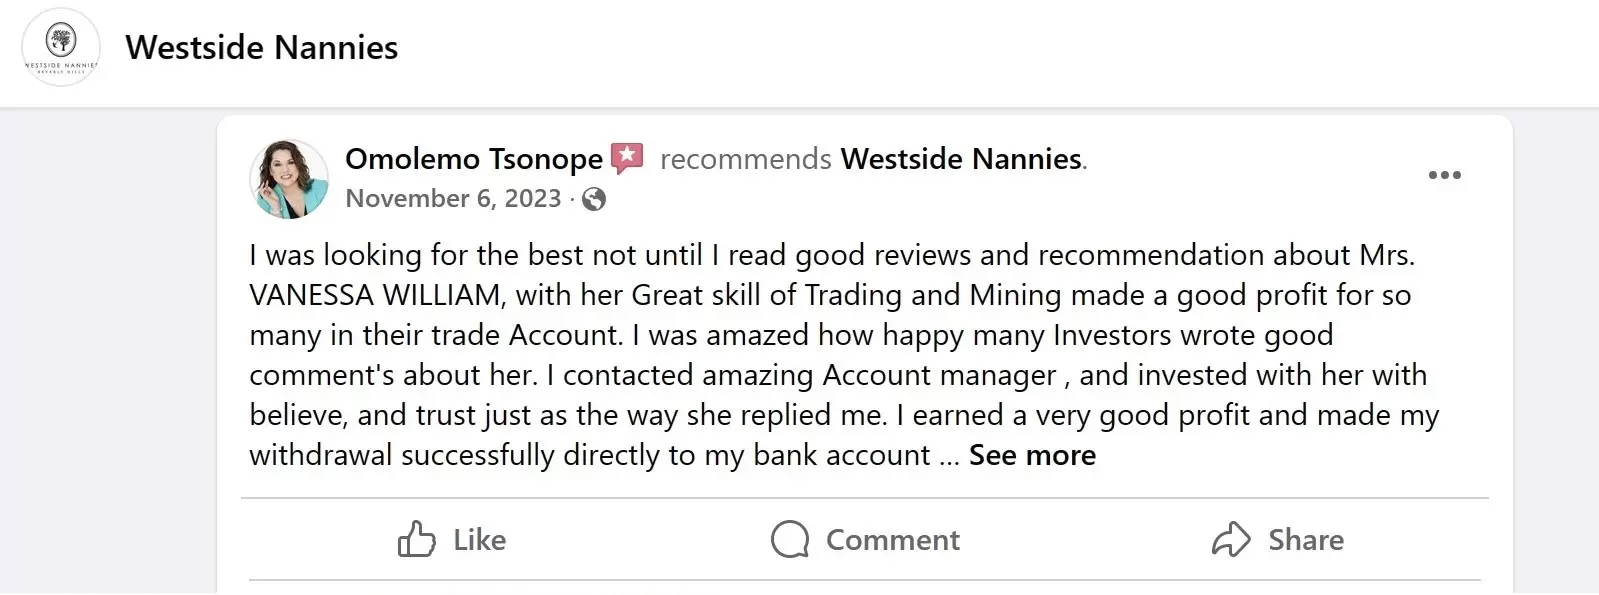 critical review of Westside Nannies